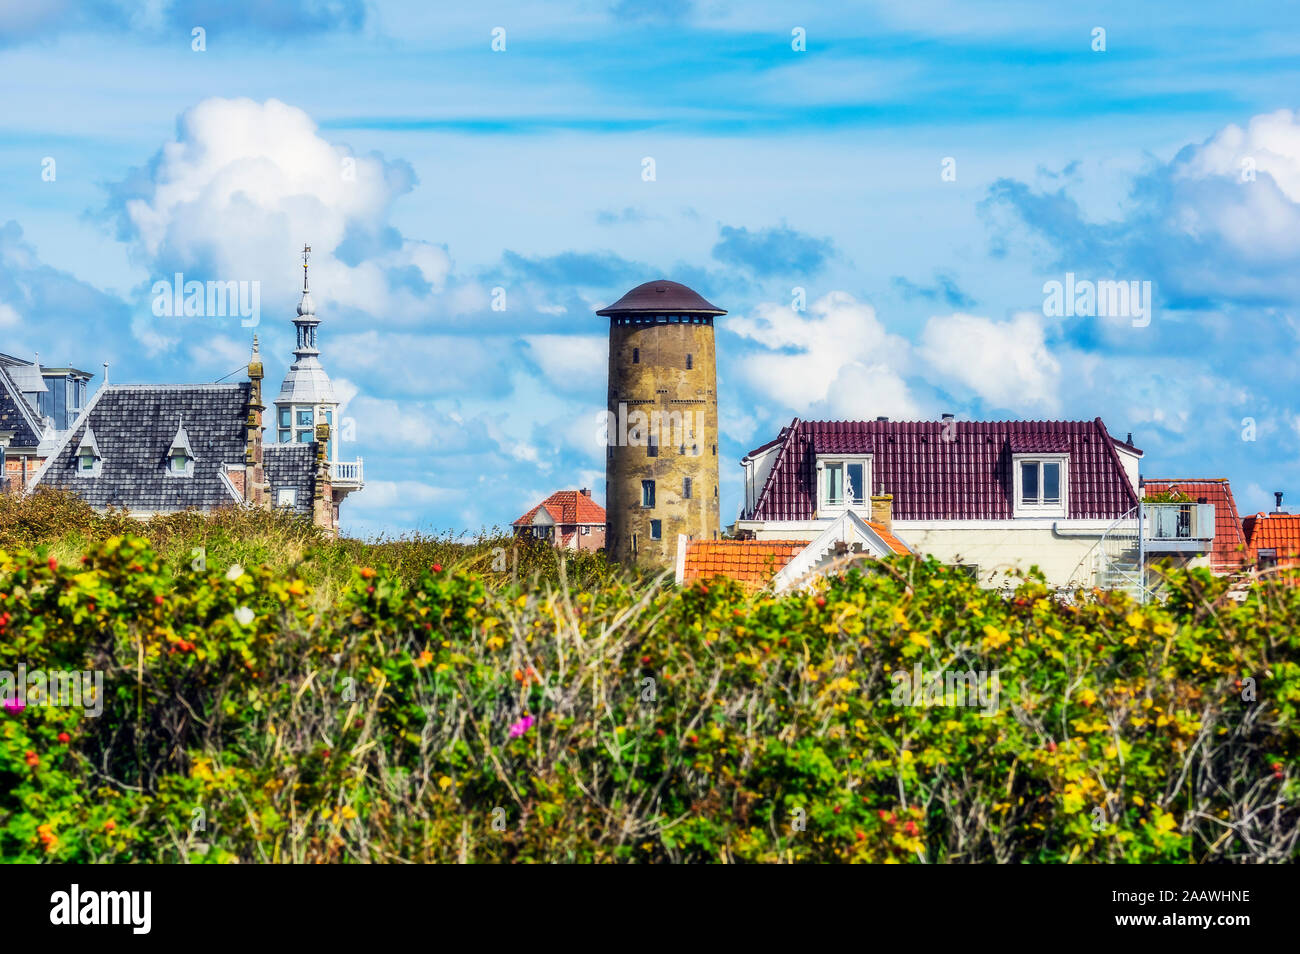 Netherlands, Zeeland, Domburg, townscape with old water tower Stock Photo